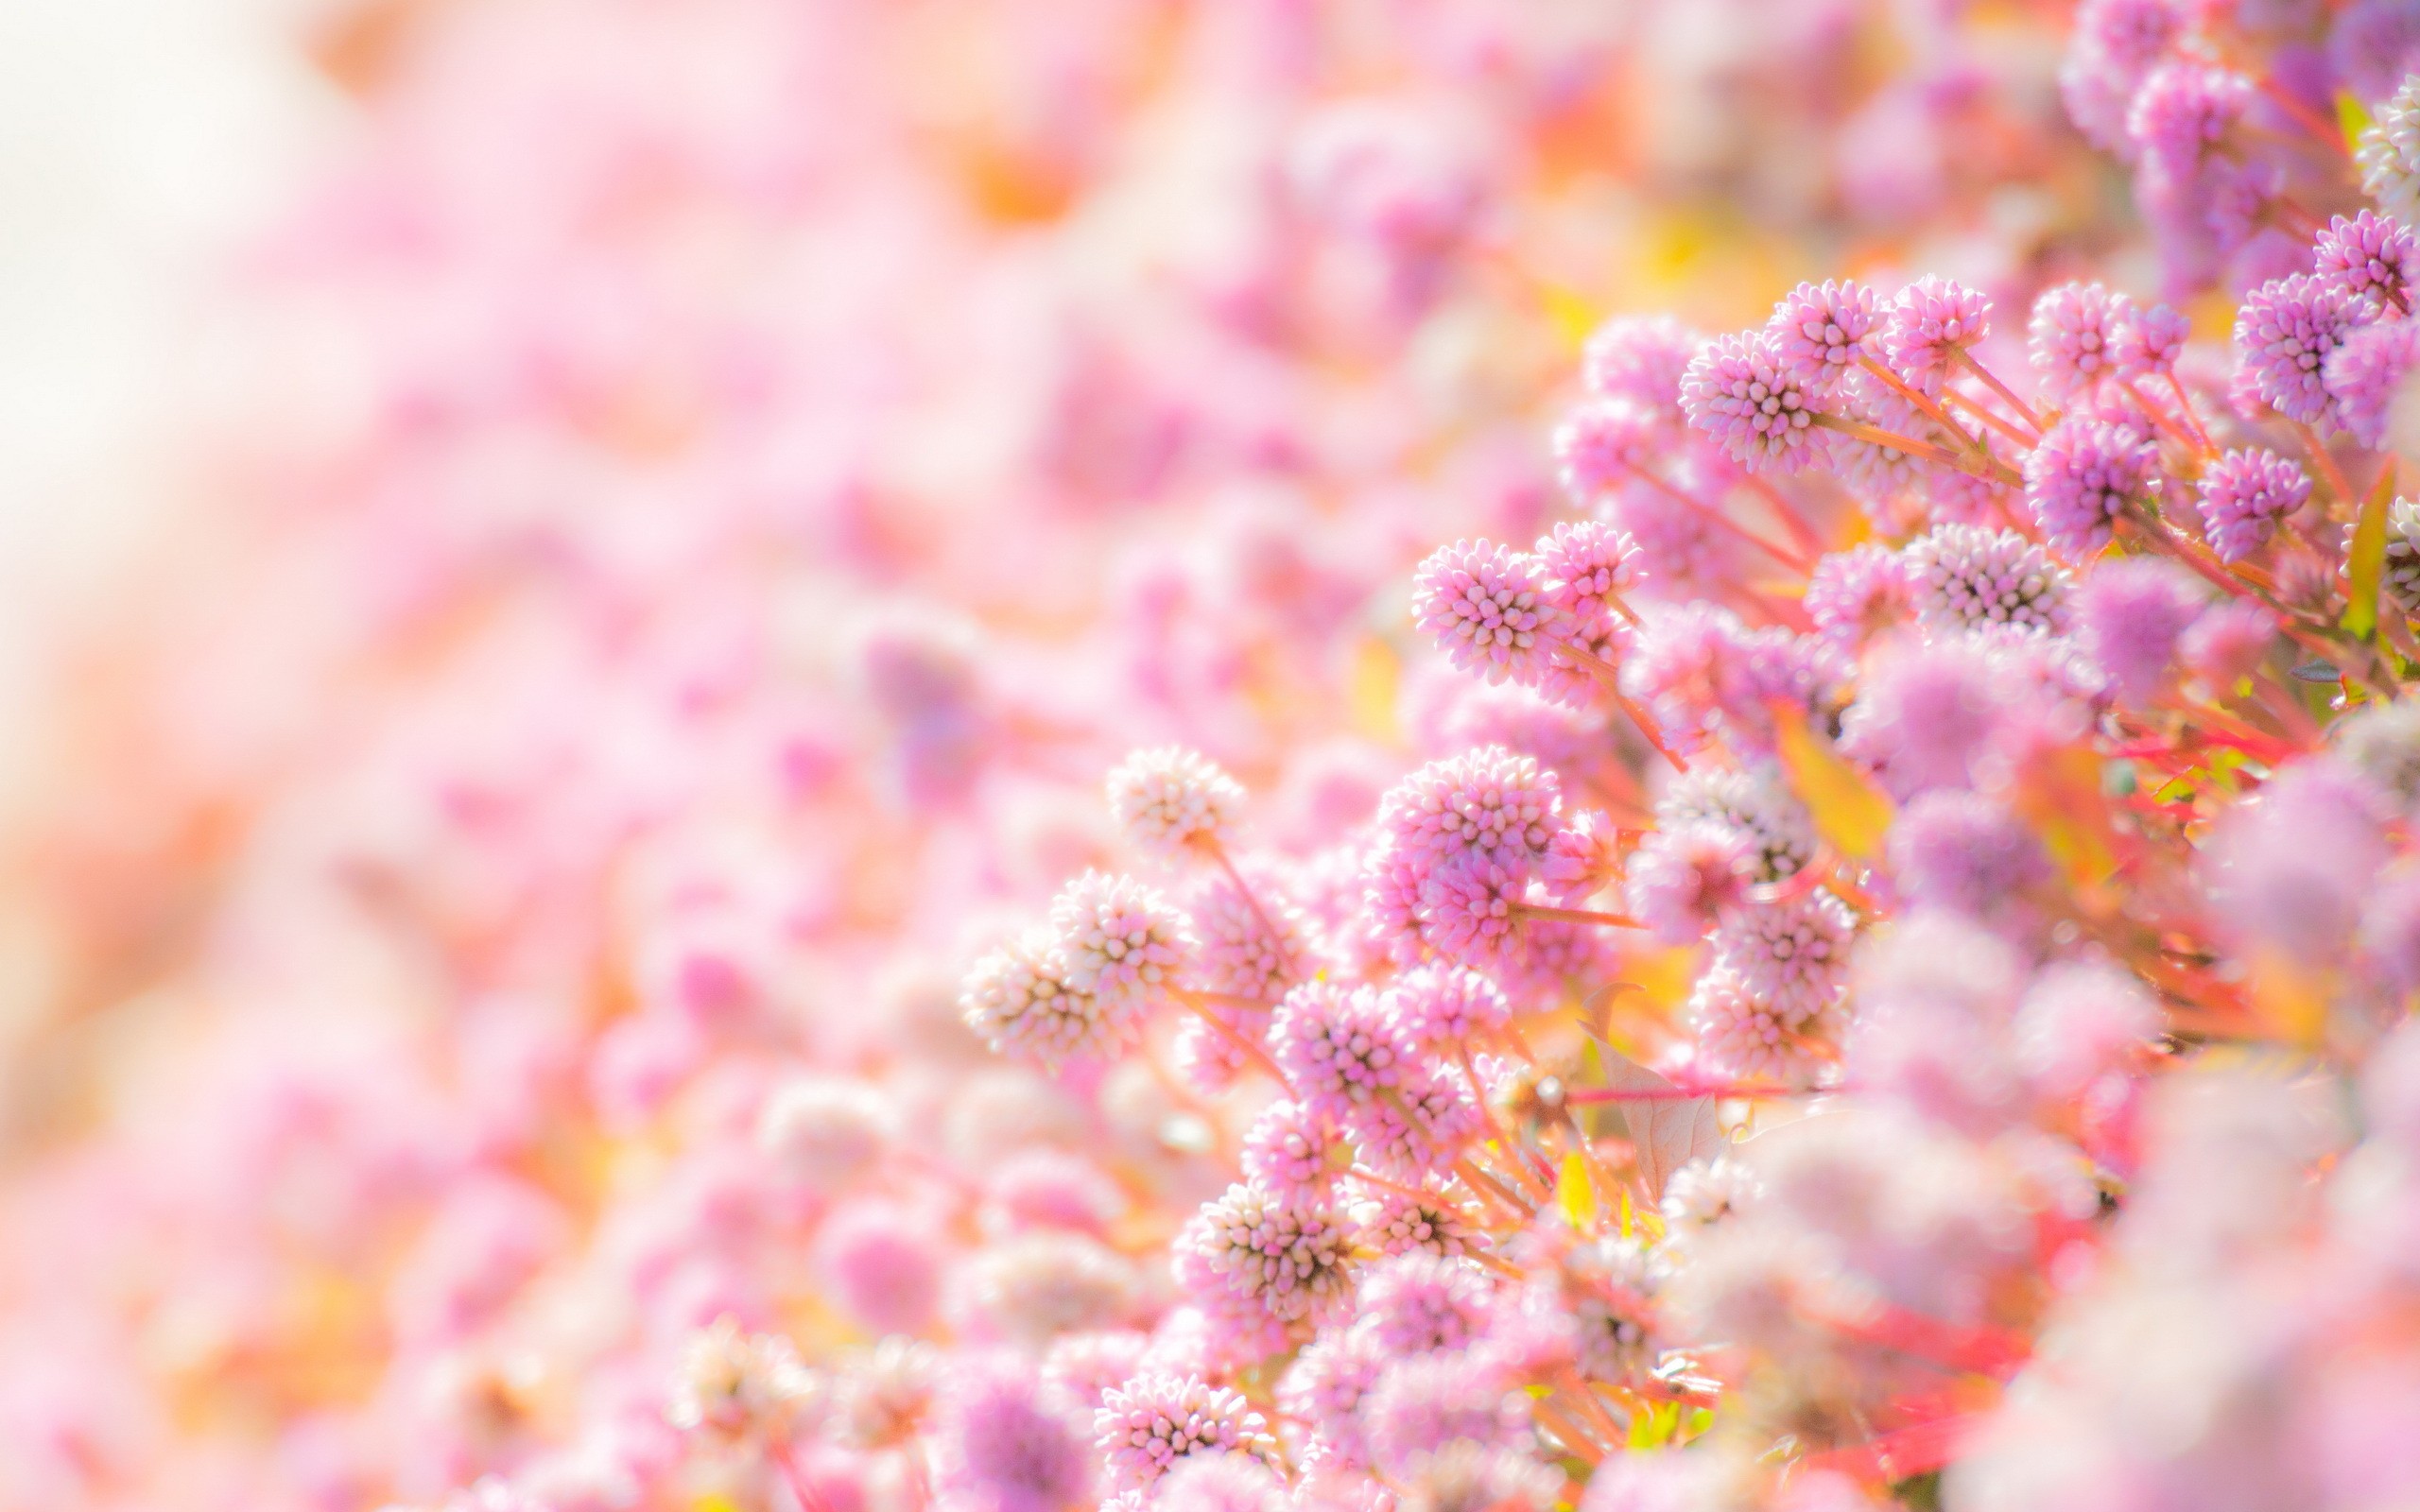 General 2560x1600 plants flowers nature depth of field bright pink flowers vibrant closeup